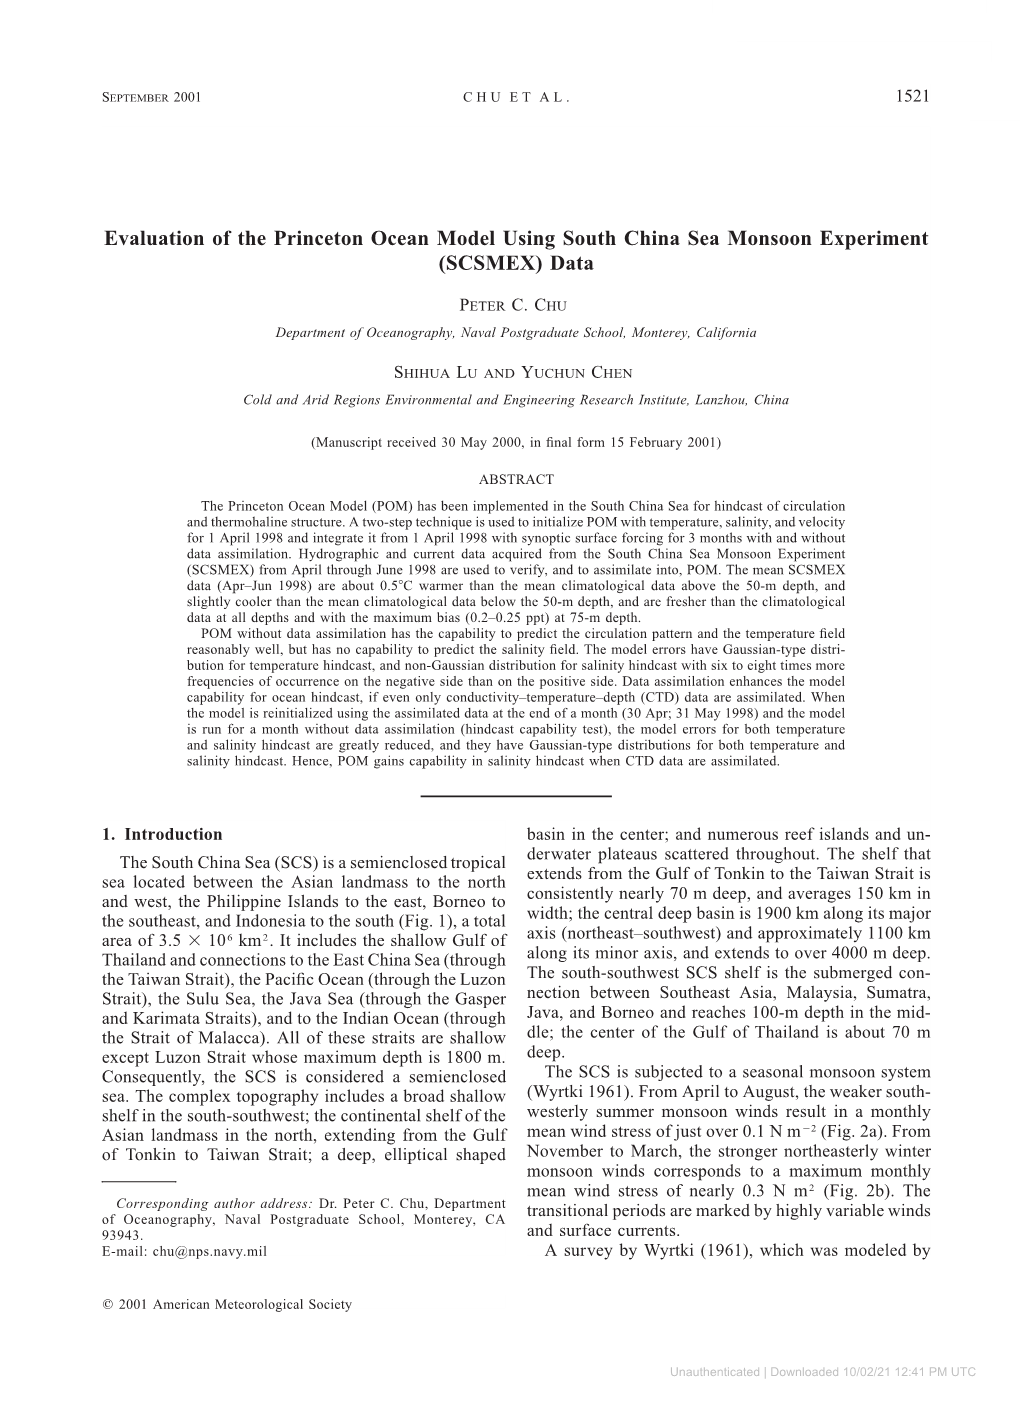 Evaluation of the Princeton Ocean Model Using South China Sea Monsoon Experiment (SCSMEX) Data